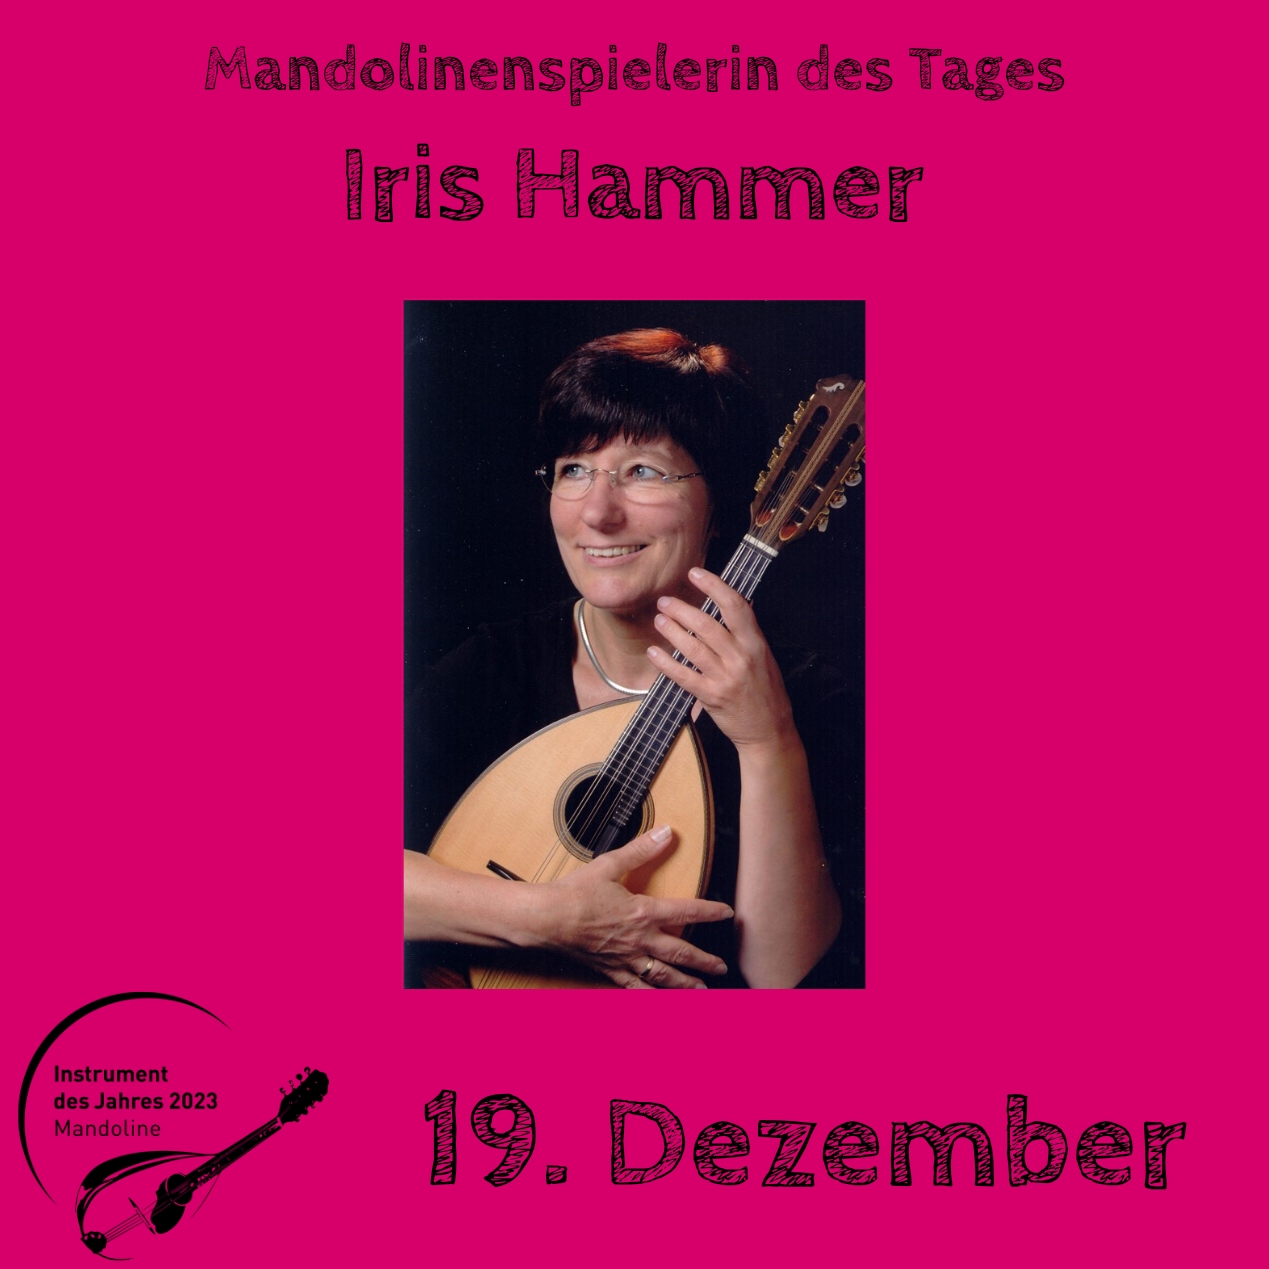 You are currently viewing 19. Dezember – Iris Hammer